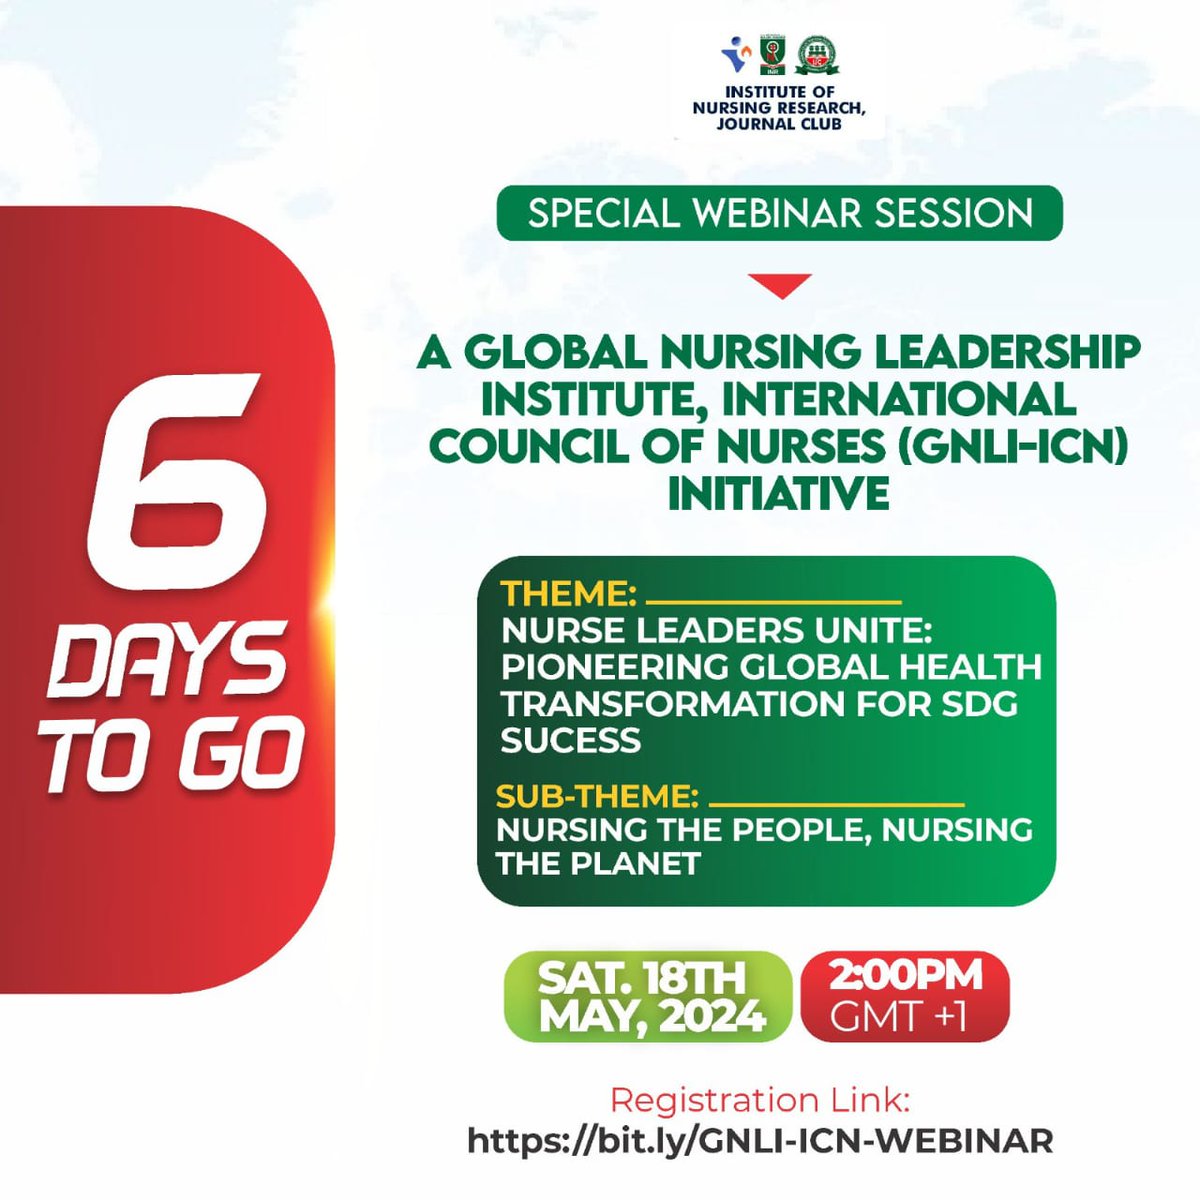 Don't just register/plan to attend this webinar alone. Invite your colleagues to enjoy this opportunity with you 6 days to go bit.ly/GNLI-ICN-WEBIN…